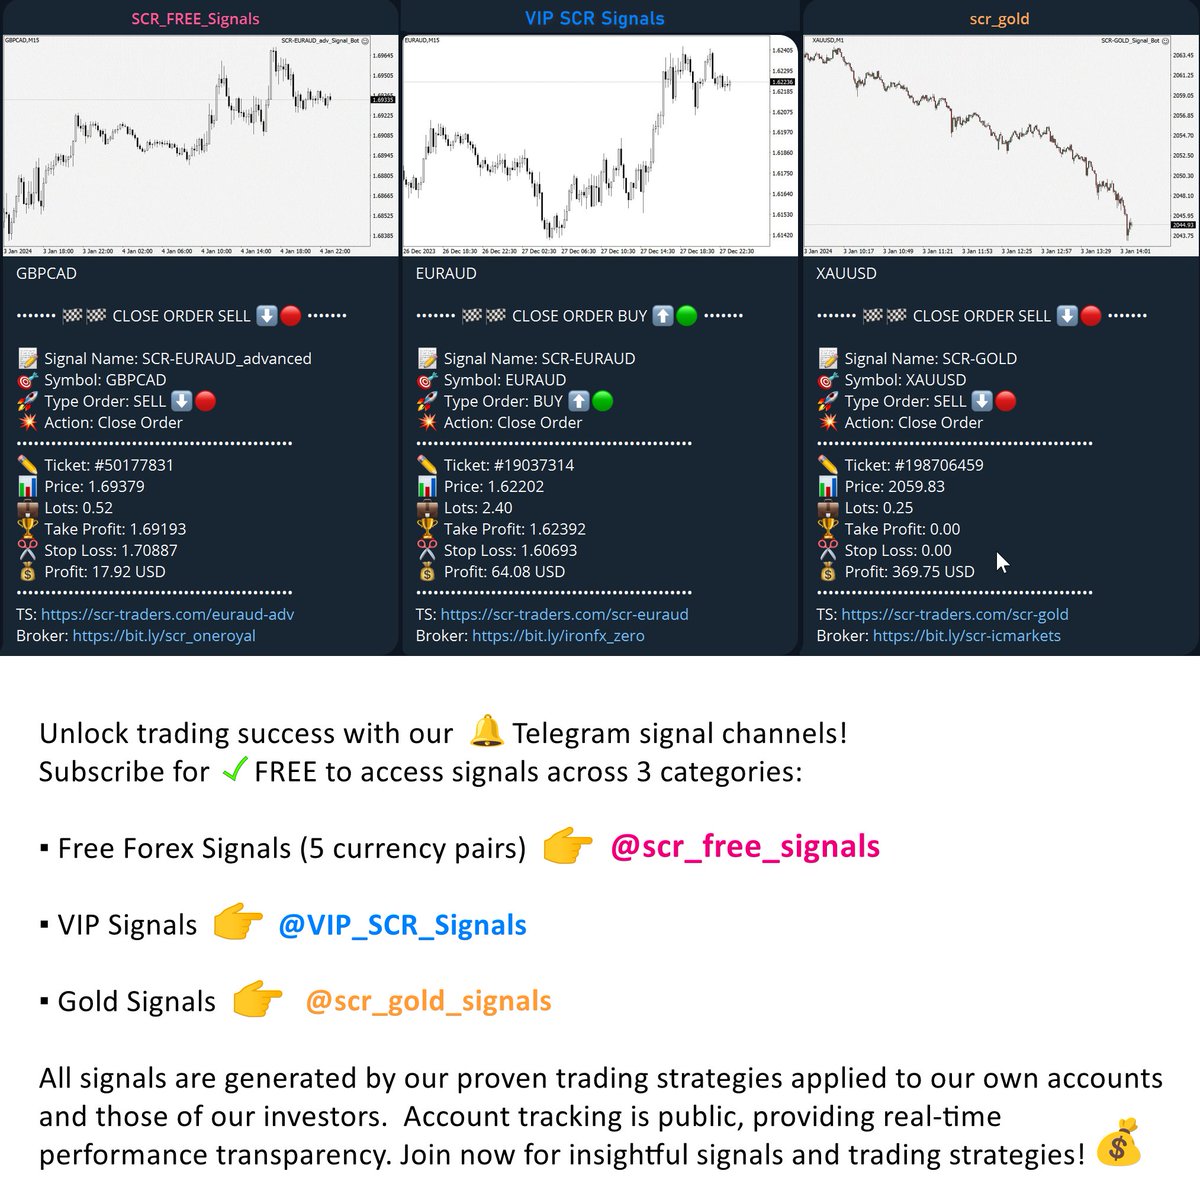 📈 Telegram trading signals from SCR TRADERS GROUP
- -
#forex #forexsignals #trading #tradingsignals #tradingsignalsprovider #telegramtrading #algotrading #robotrader #finance #investor #tradingsetup #goldtrading #cfdtrading #goldsignals #socialtrading #millionaire #passiveincome